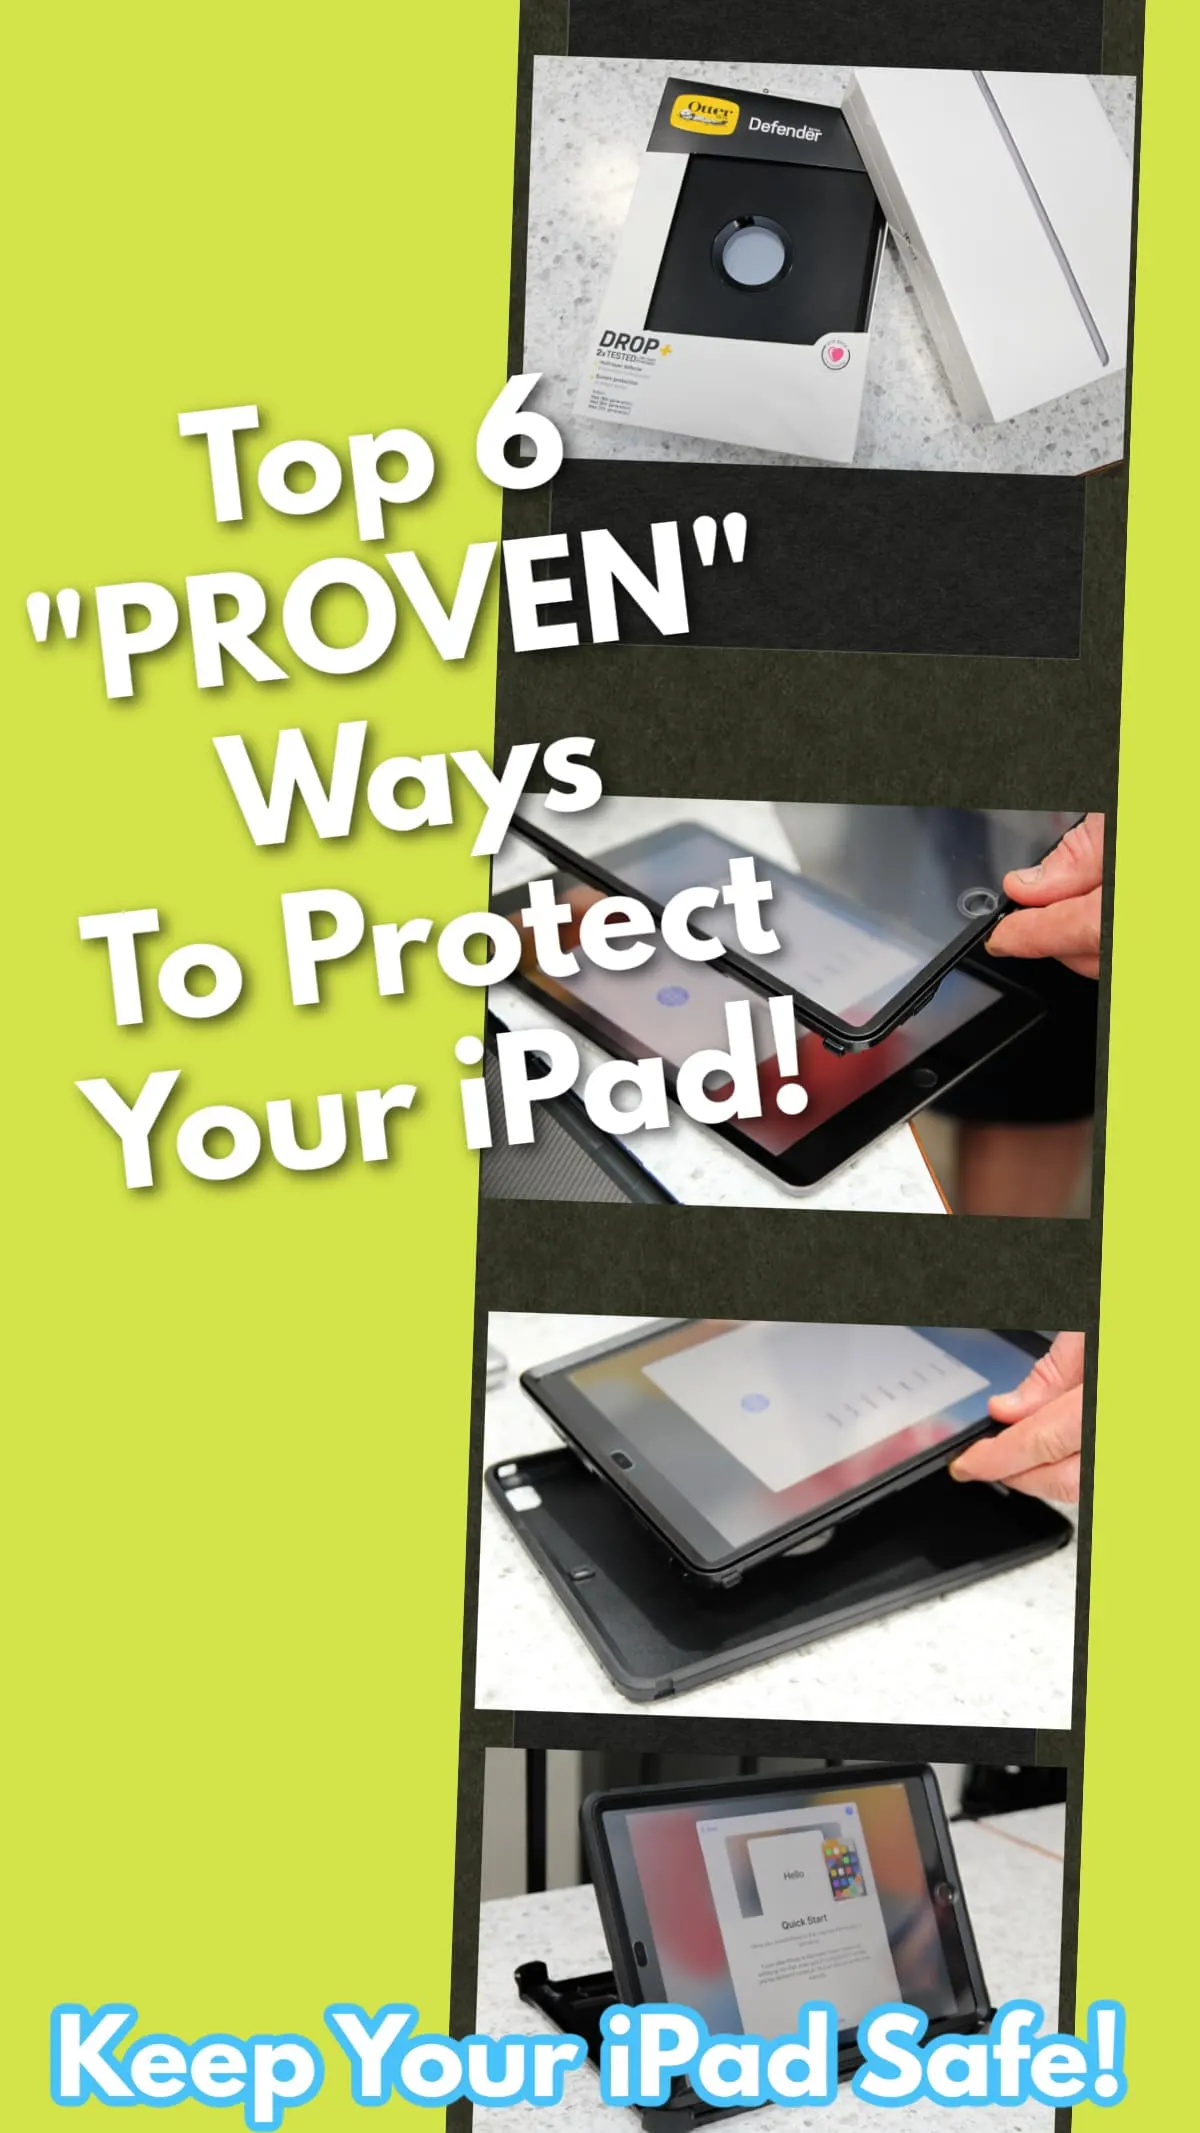 Proven Top 6 Ways To Keep Your iPad Protected